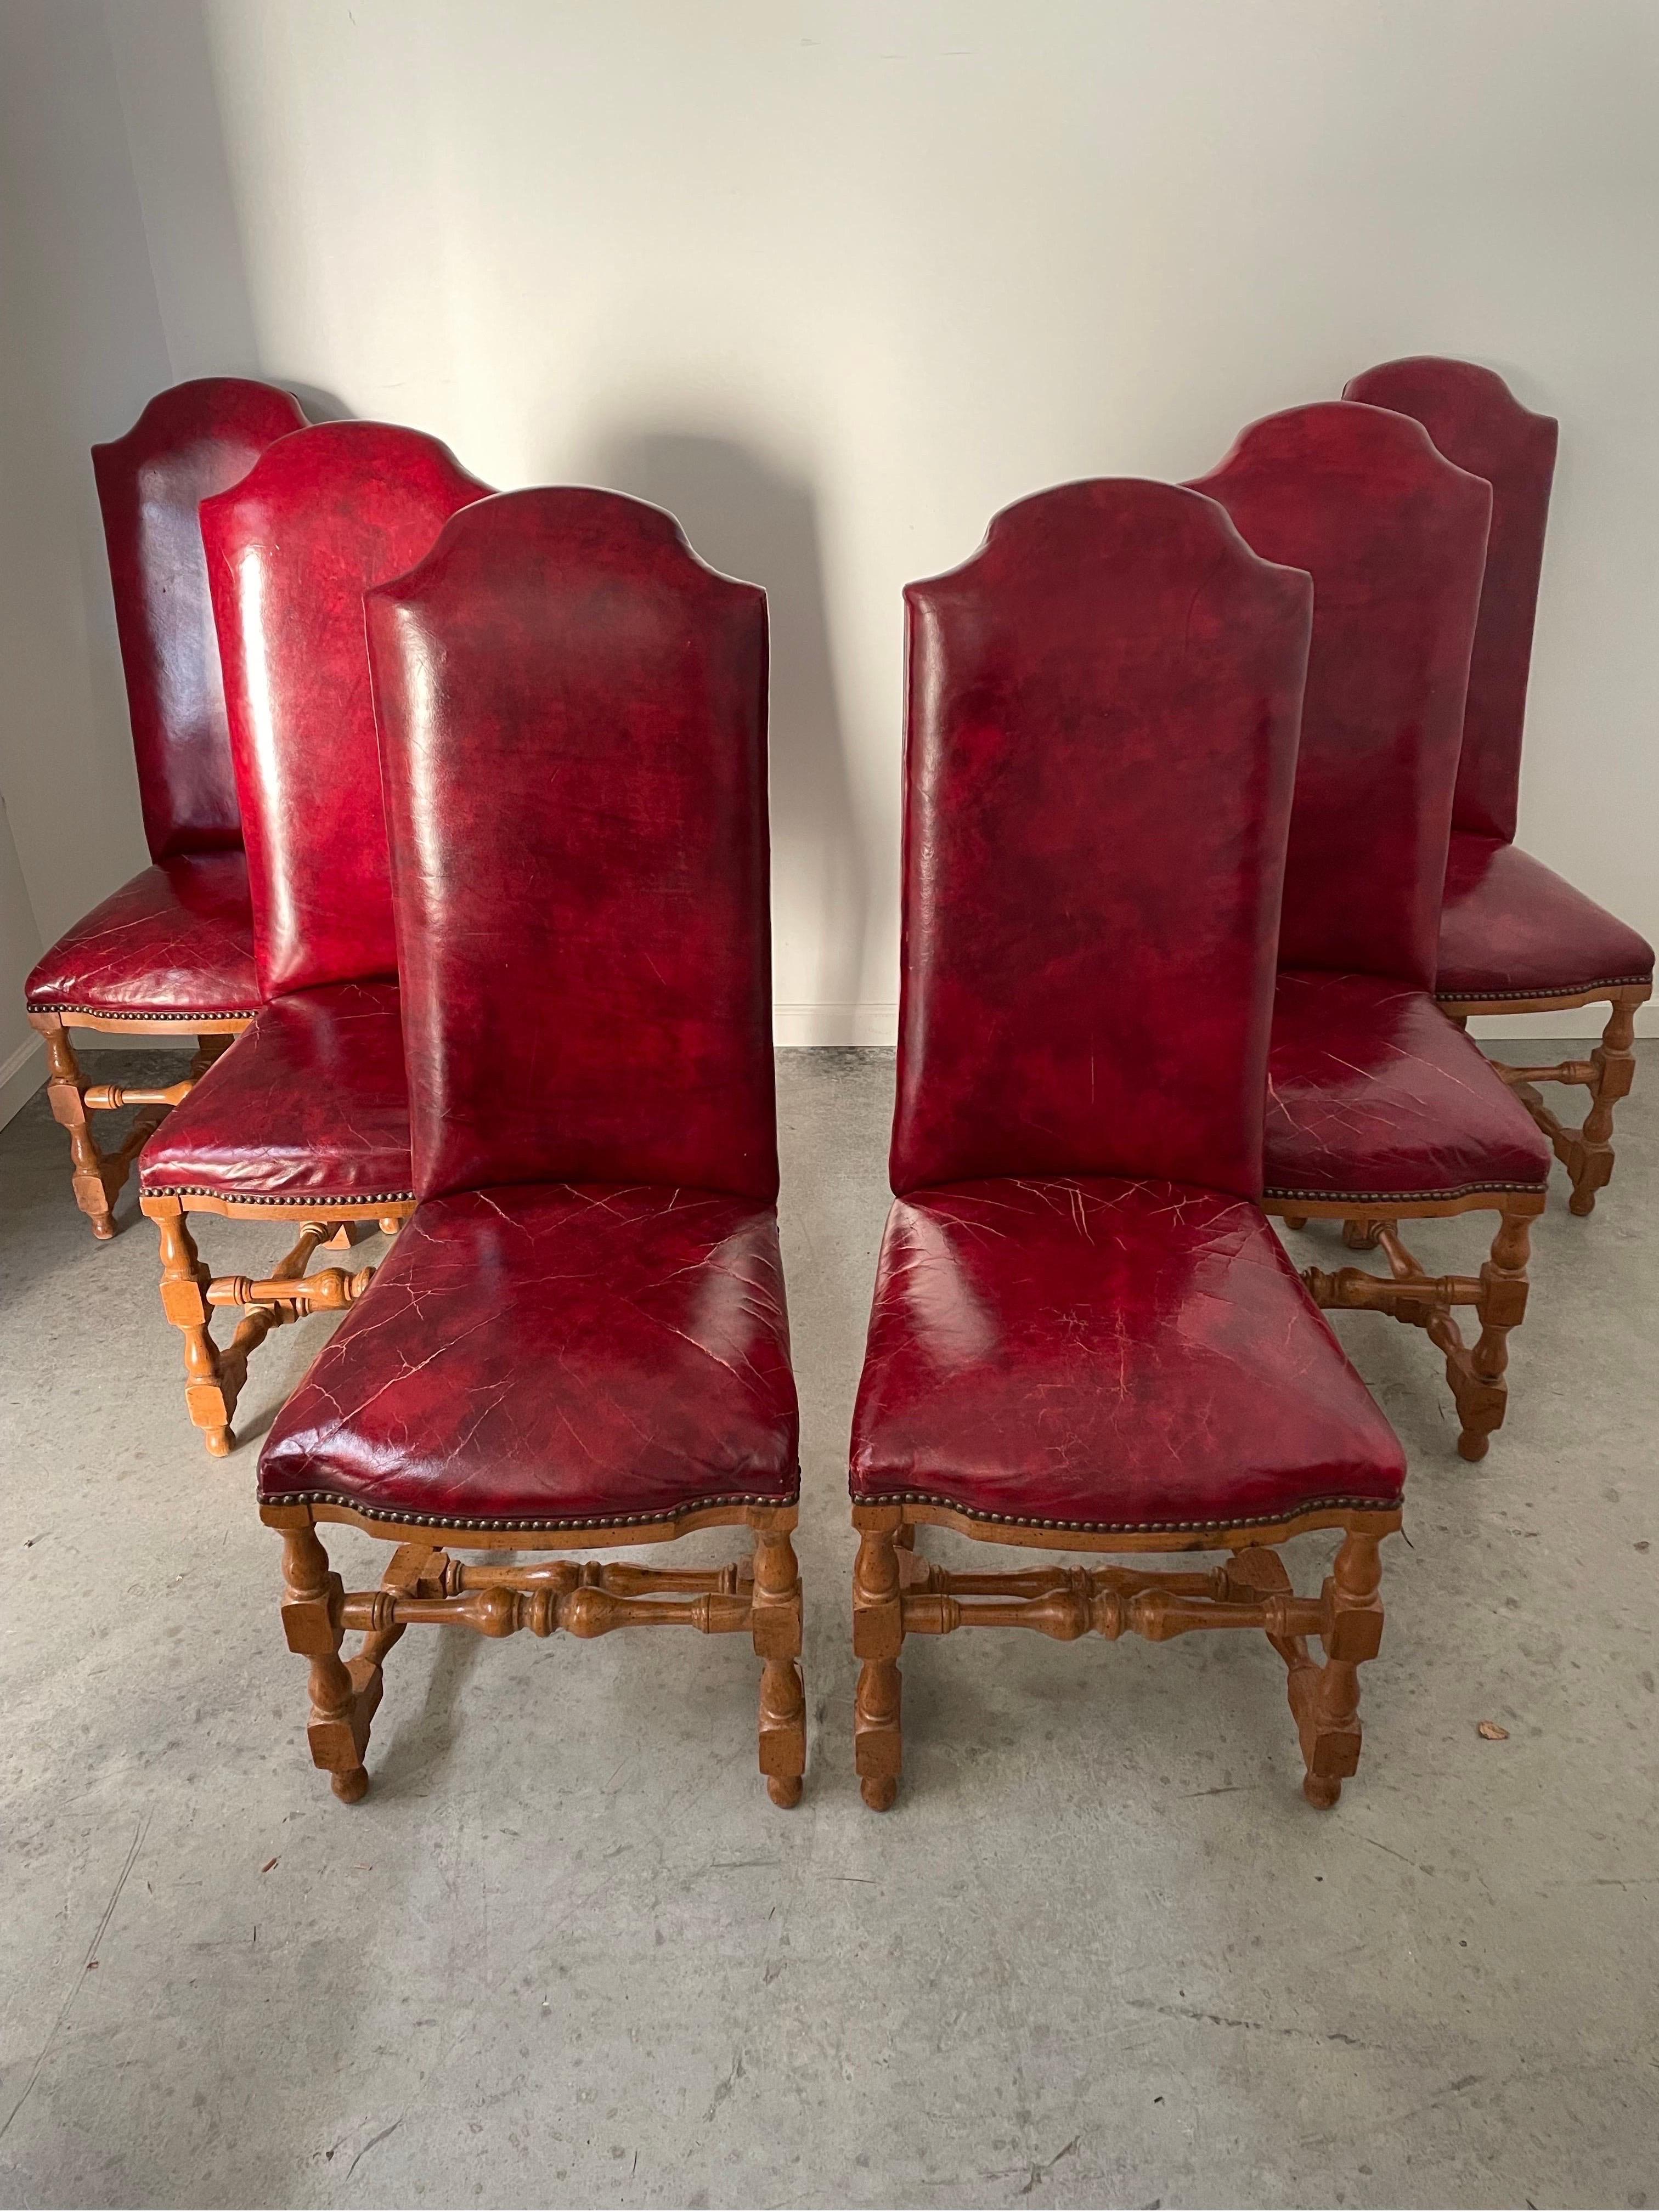 Set of 6 dining chairs in the Louis xiii style made circa mid century. Red leather and studs.

15.5w x 46